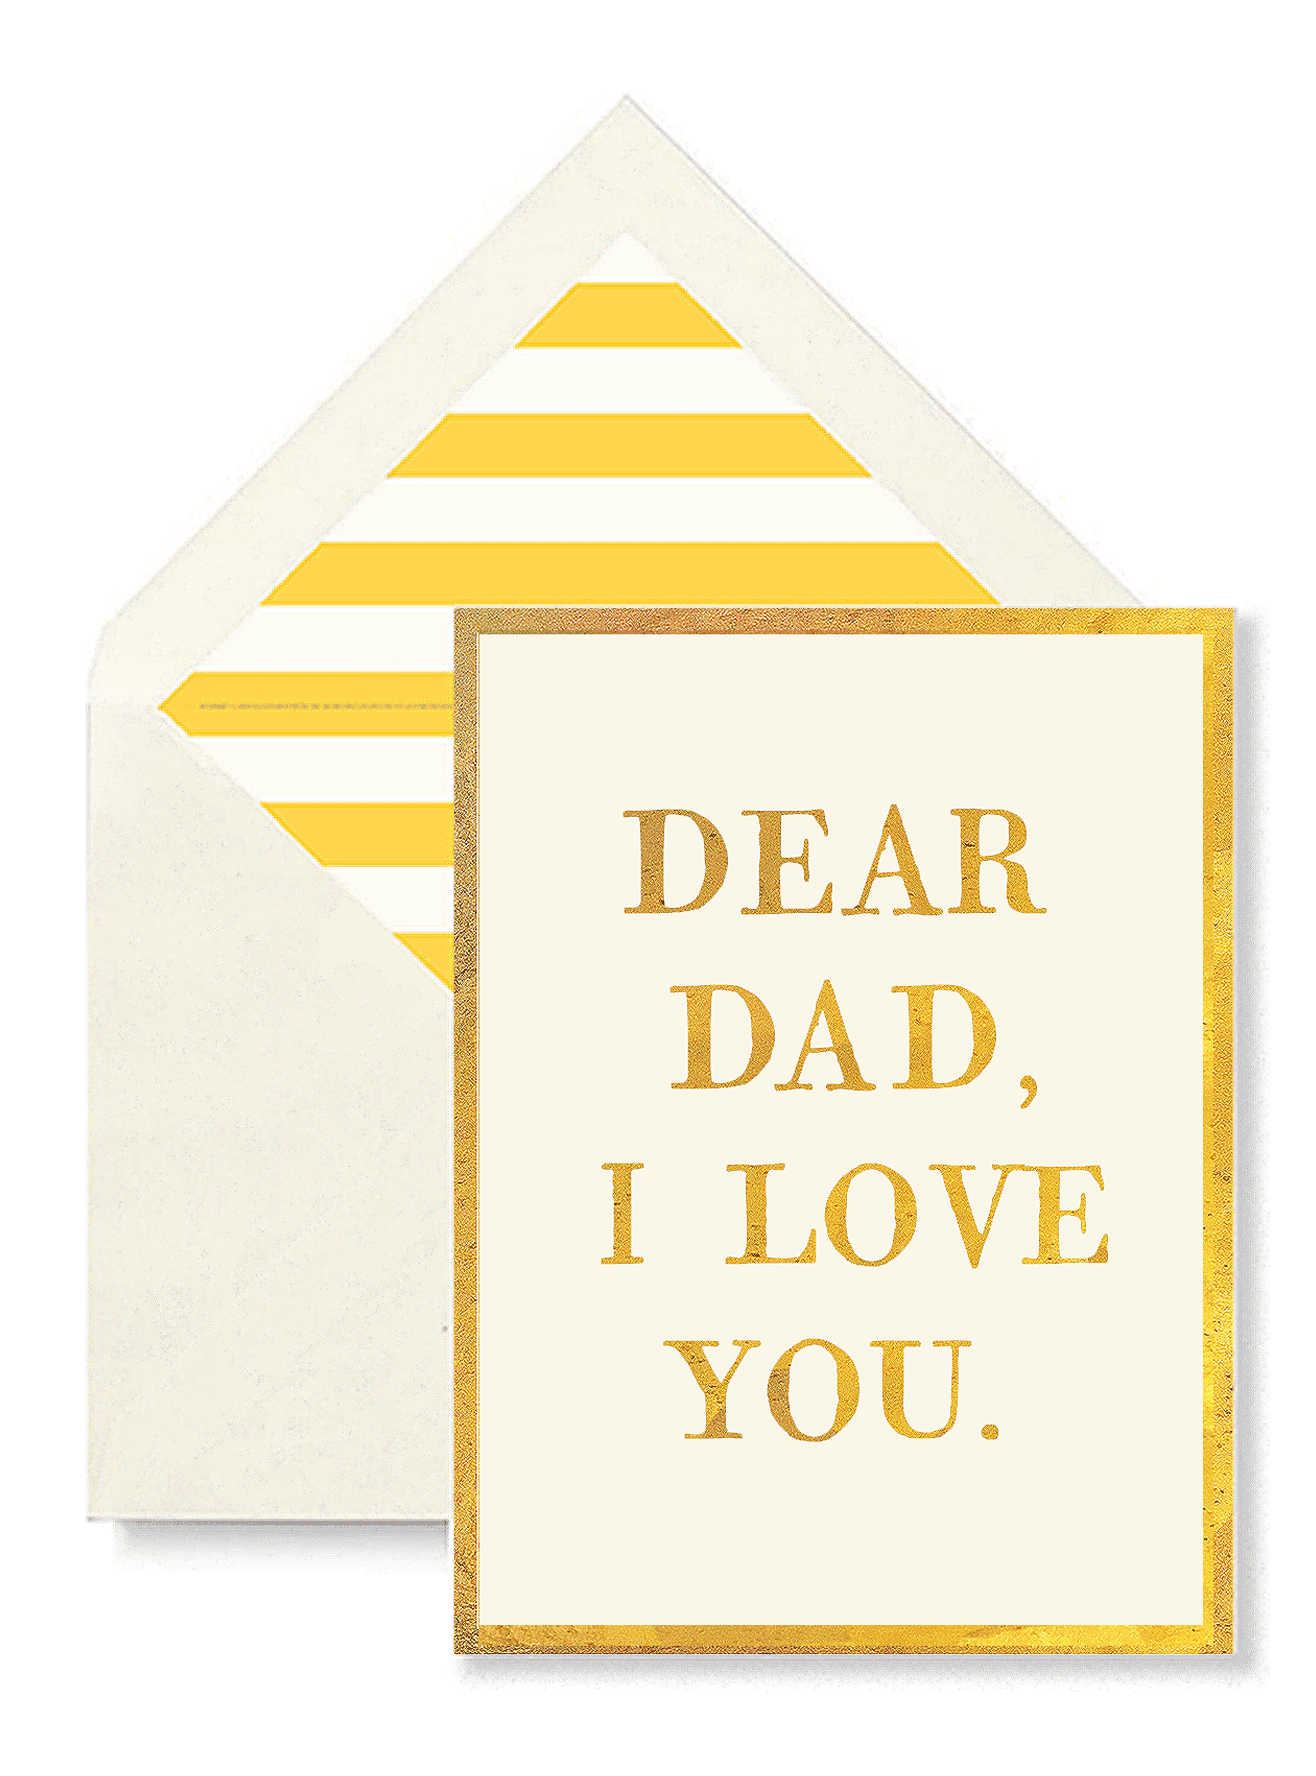 Dear Dad, I Love You Greeting Card, Single Folded Card or Boxed Set of 8 - Bensgarden.com